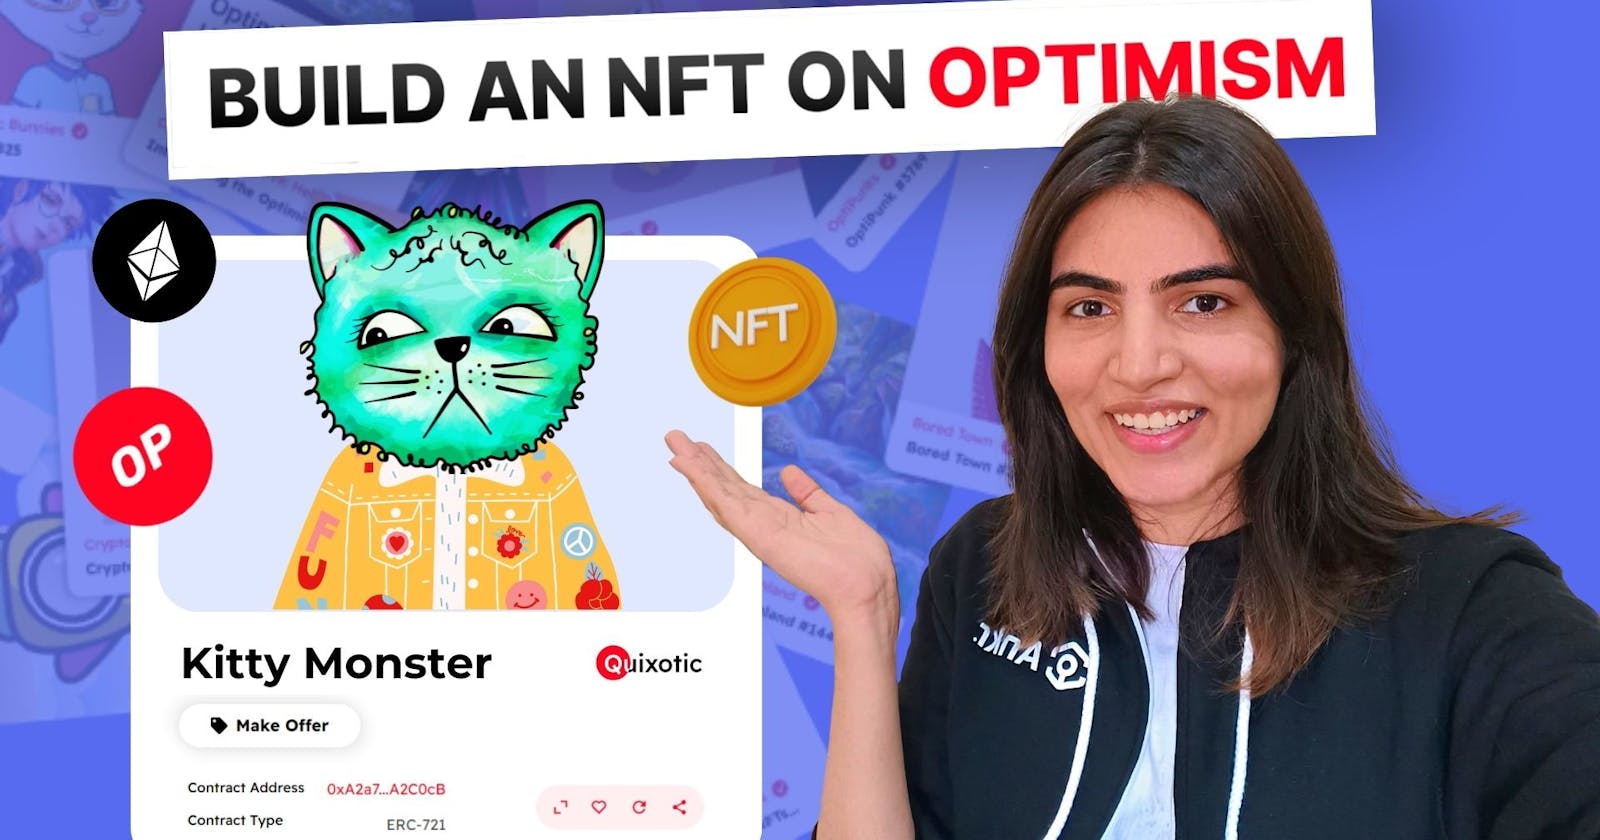 Deploy and Mint a CryptoKitties-Like NFT with ERC-721 Smart Contract